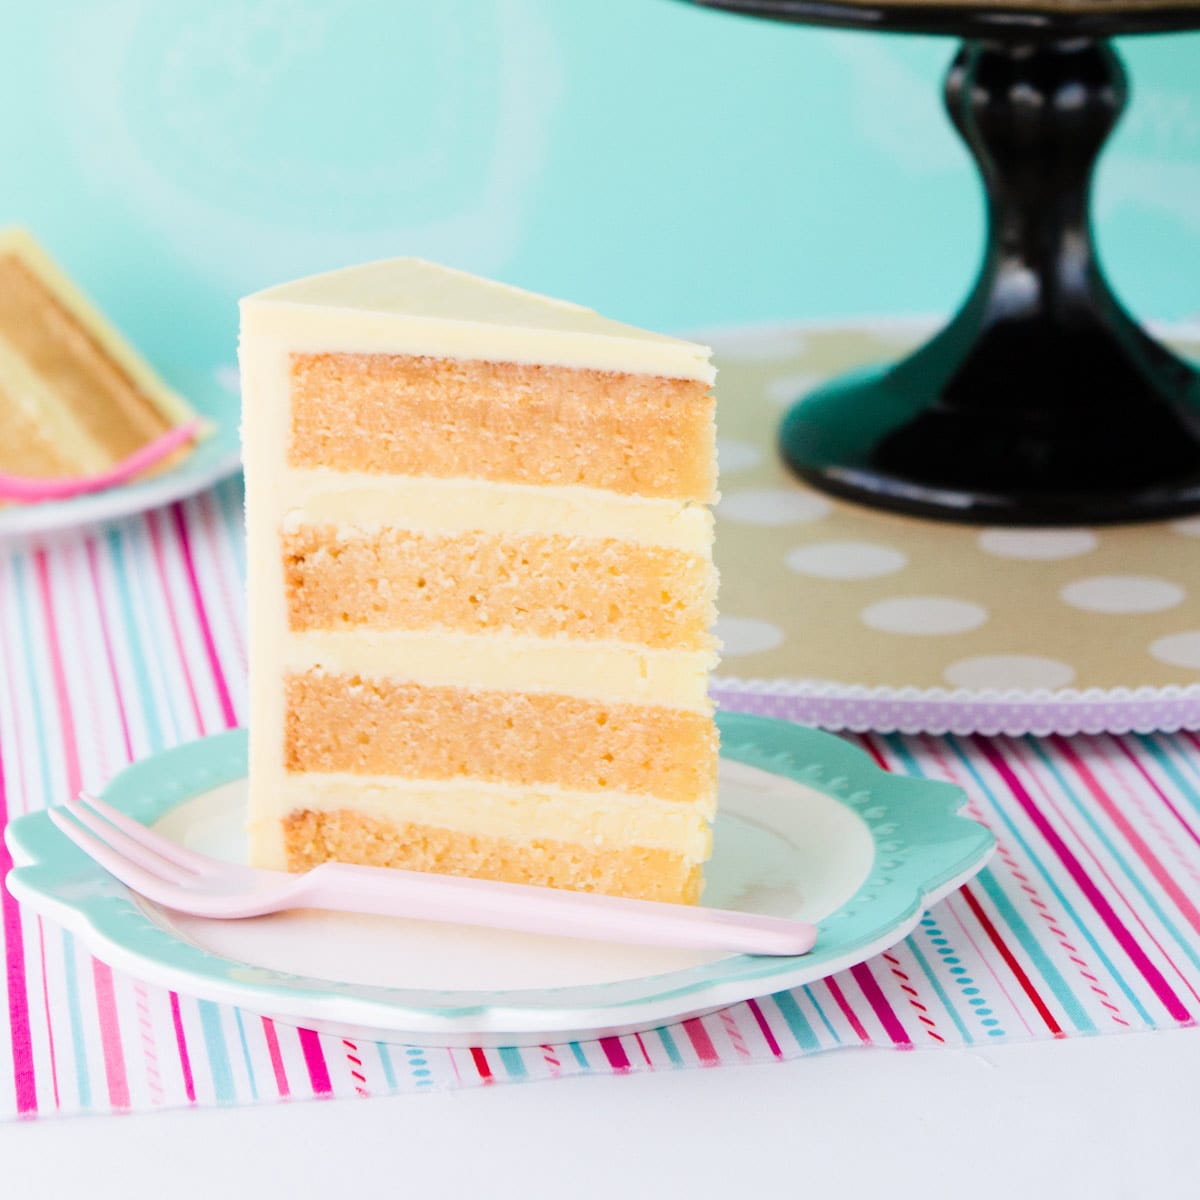 A moist, dense gluten free white chocolate mud cake. Perfect for cake decorating, it keeps well, can be covered in fondant and used for tiered cakes.